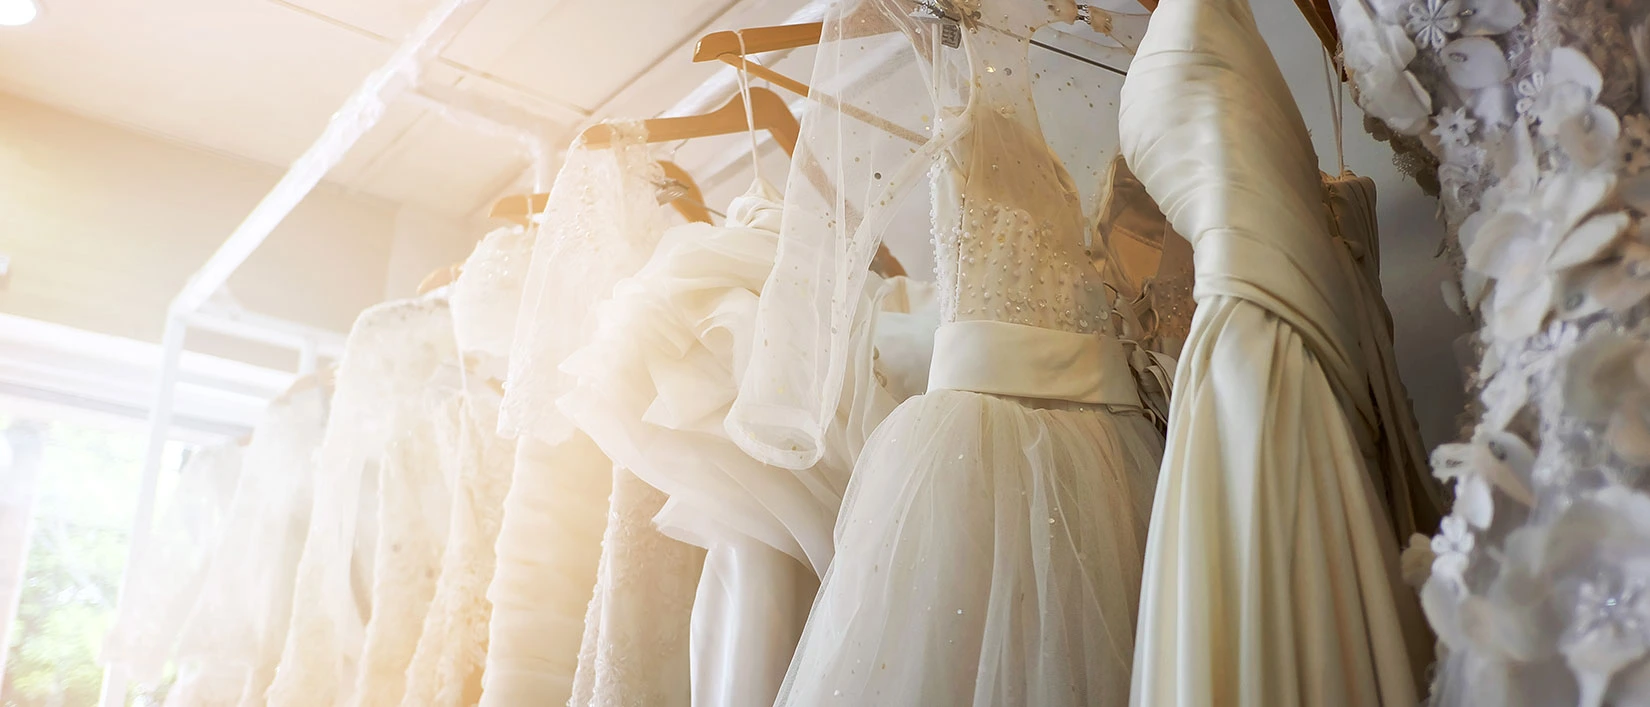 Wedding Gown Cleaning and Preservation in Albuquerque, NM